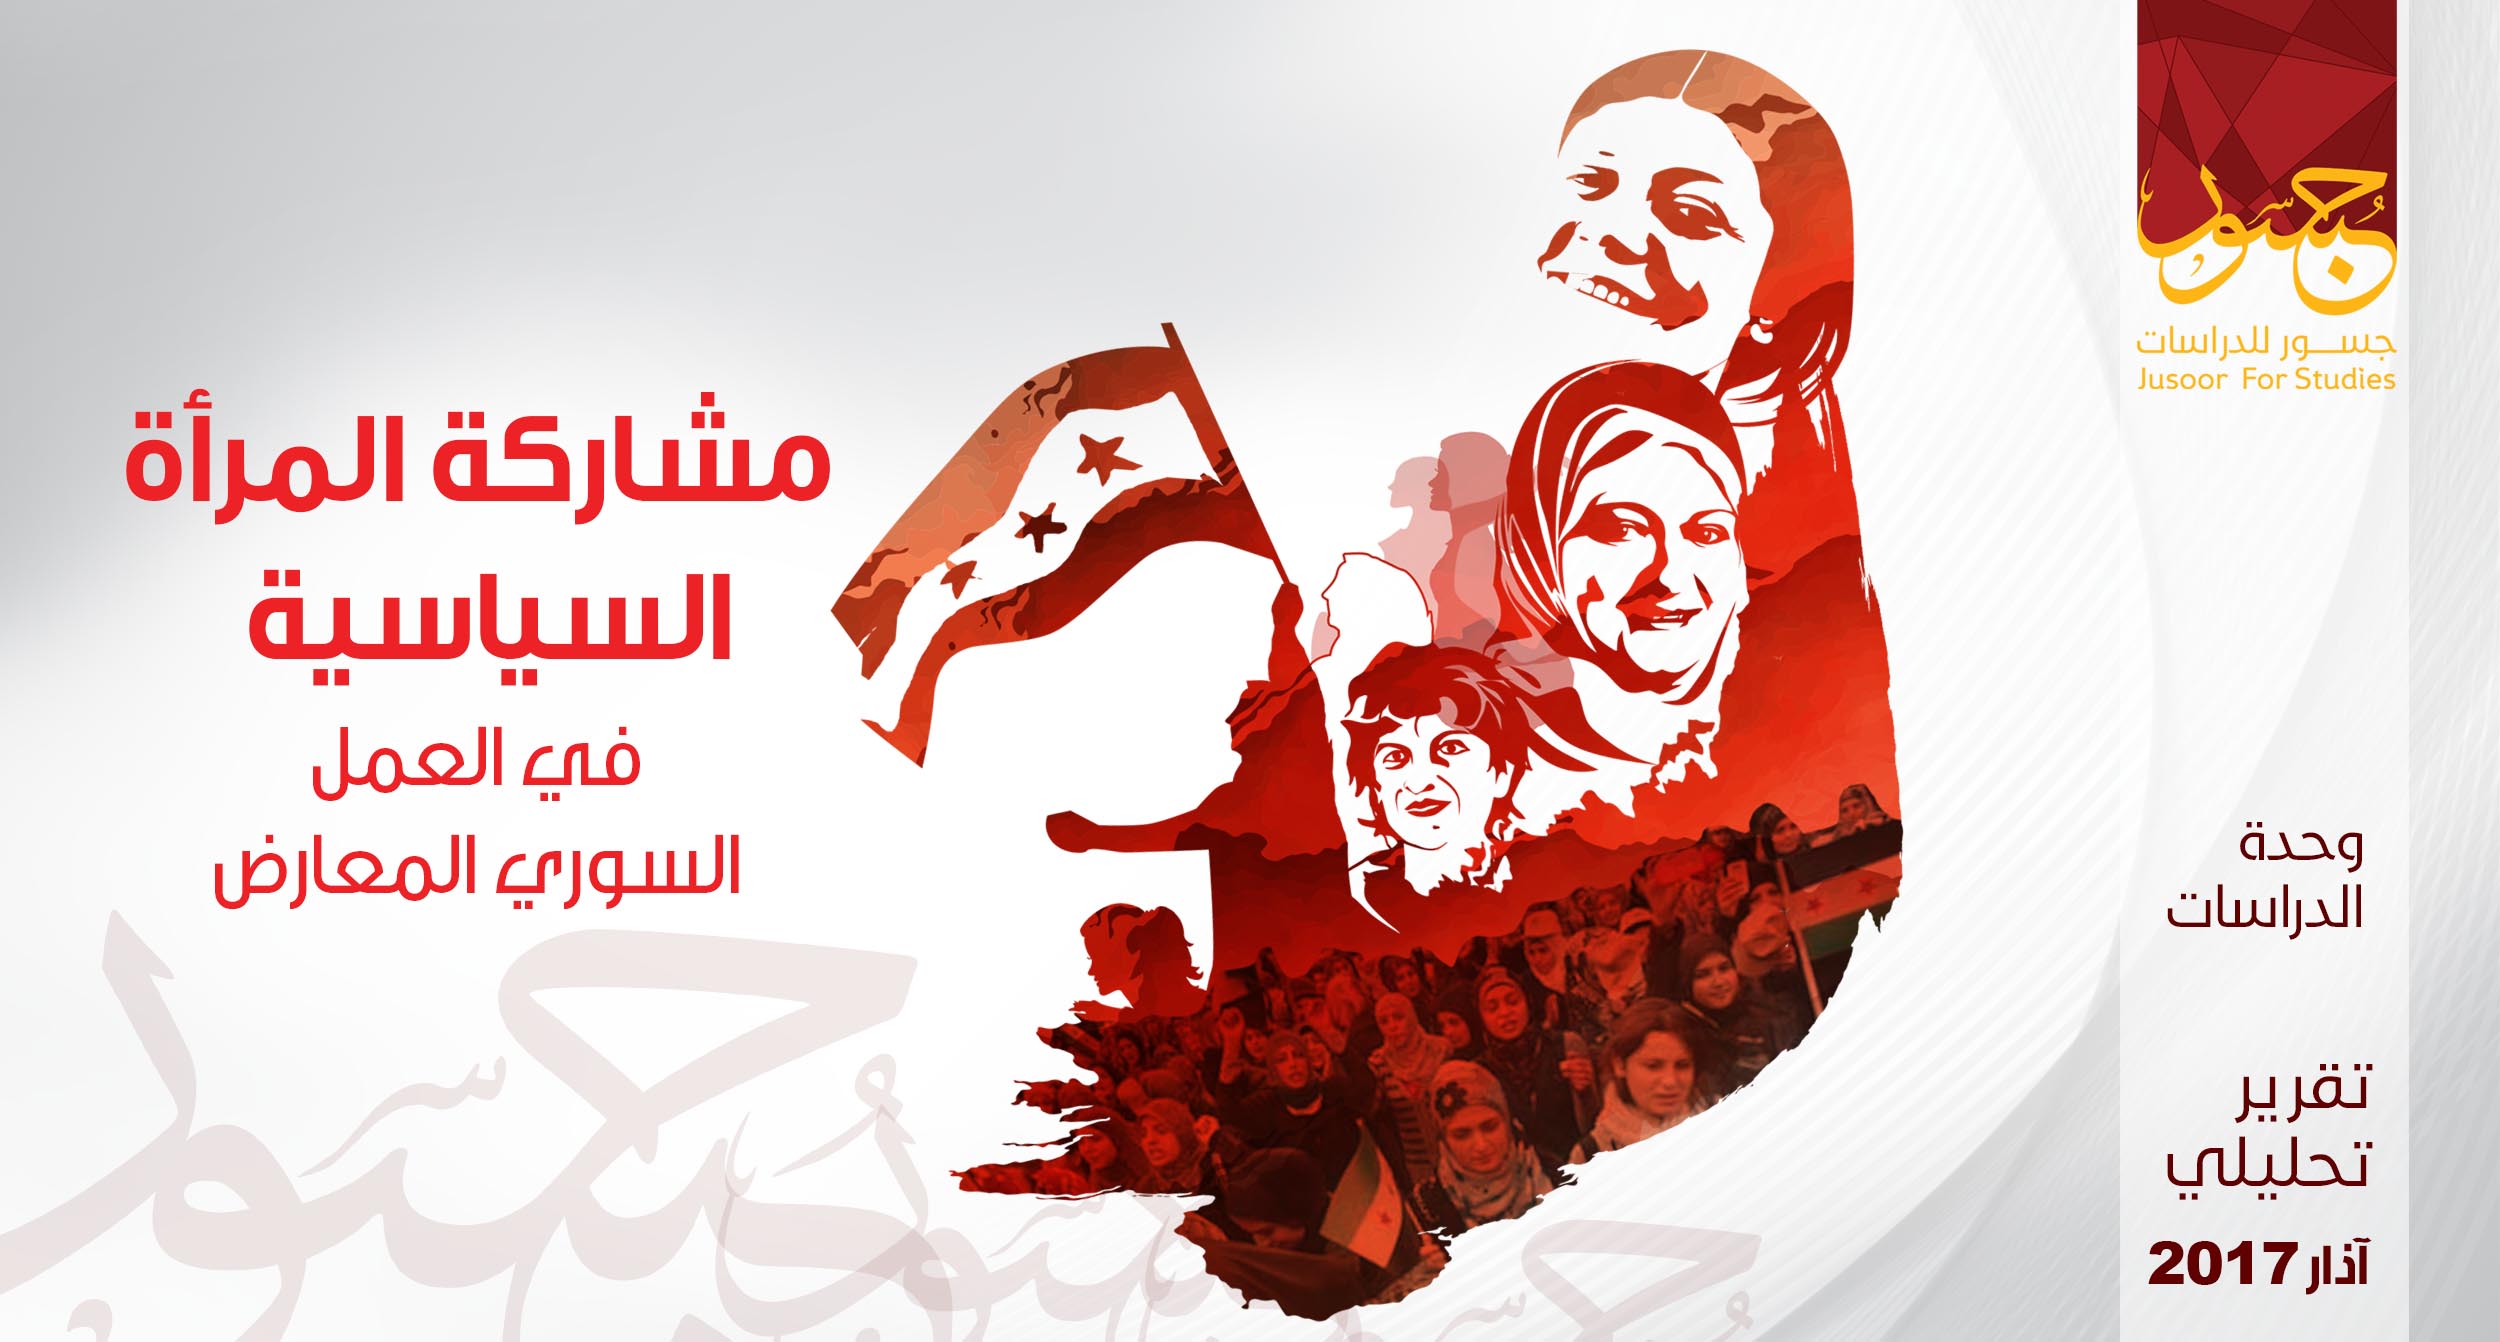 Women's political participation in the Syrian actions of opposition